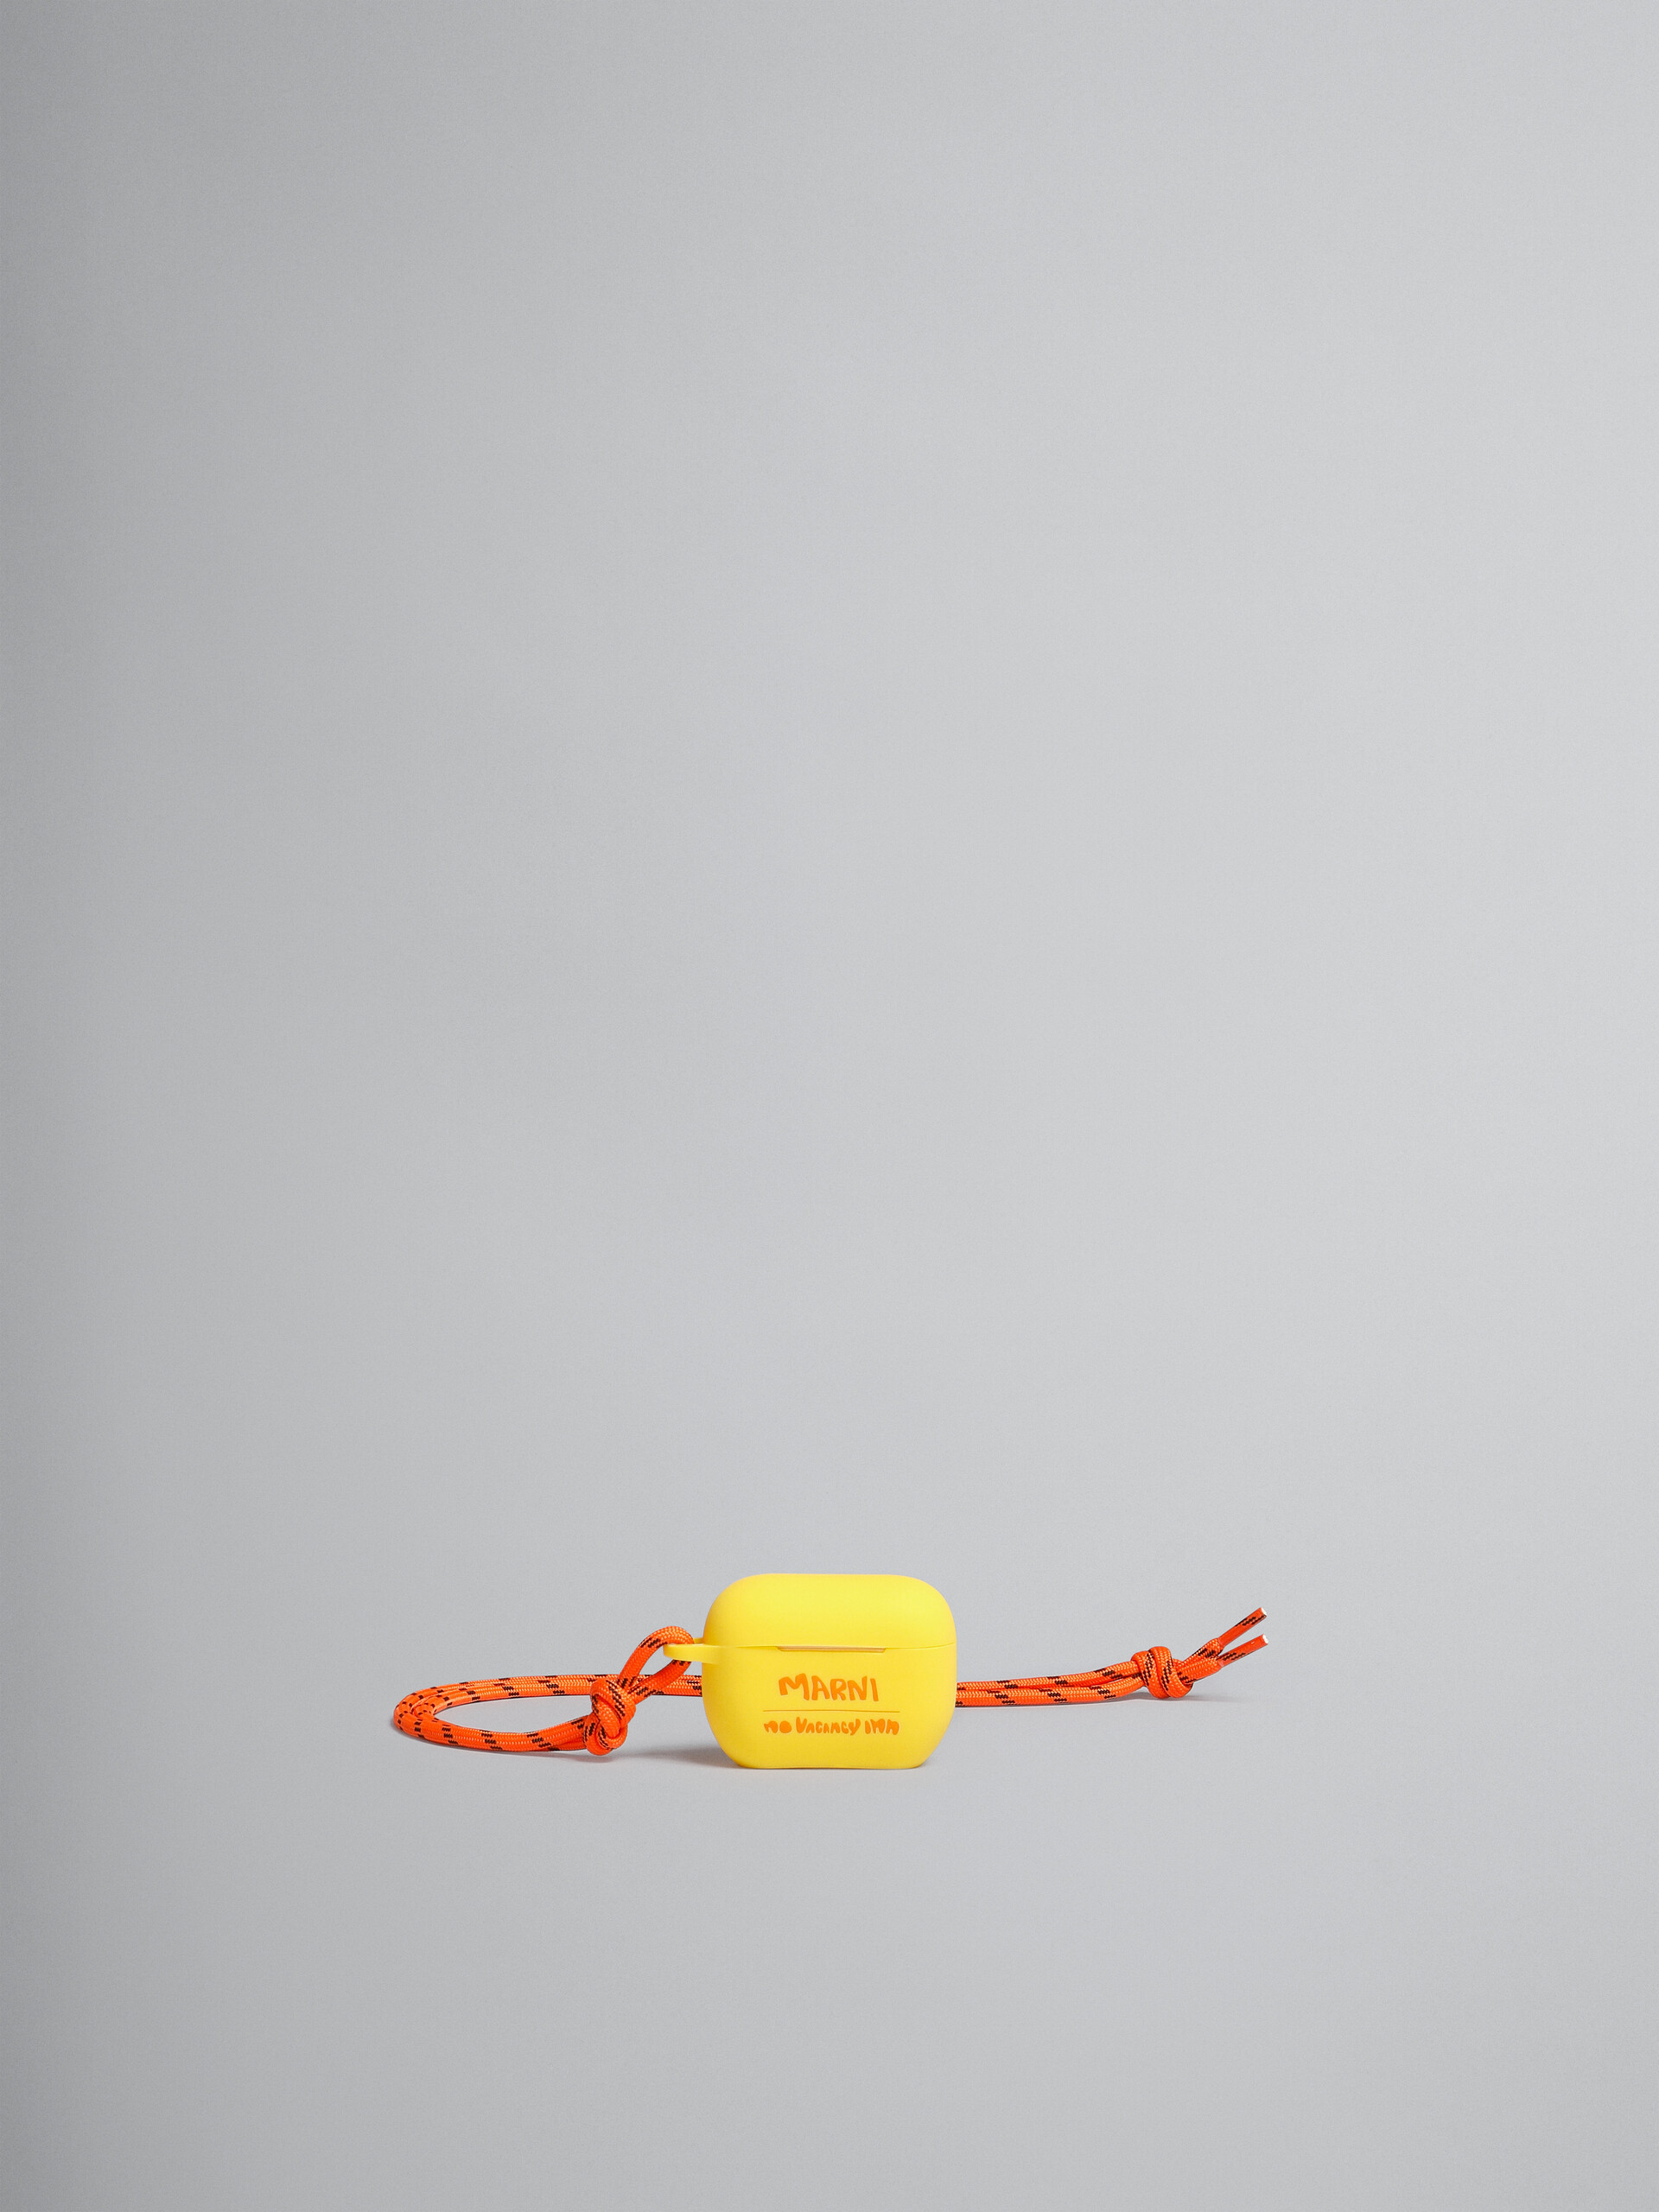 Marni x No Vacancy Inn - Yellow and orange Airpods case - Other accessories - Image 1